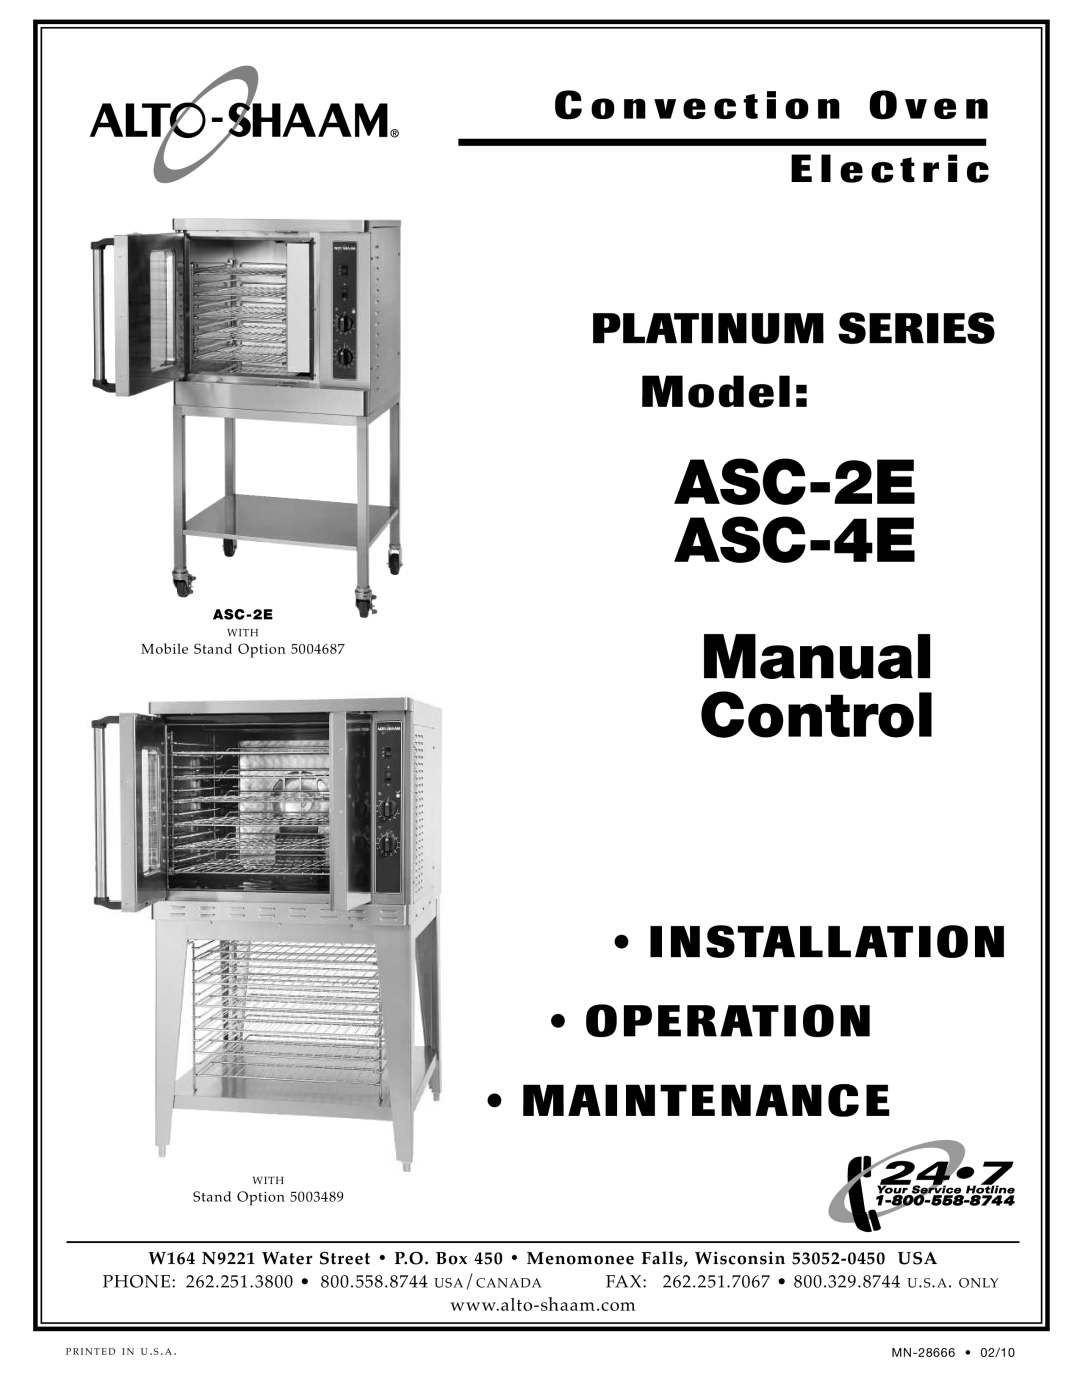 Alto-Shaam ASC-2E specifications Electric Convec Tion Oven, Factory Installed Options, Additional Features, Item No 